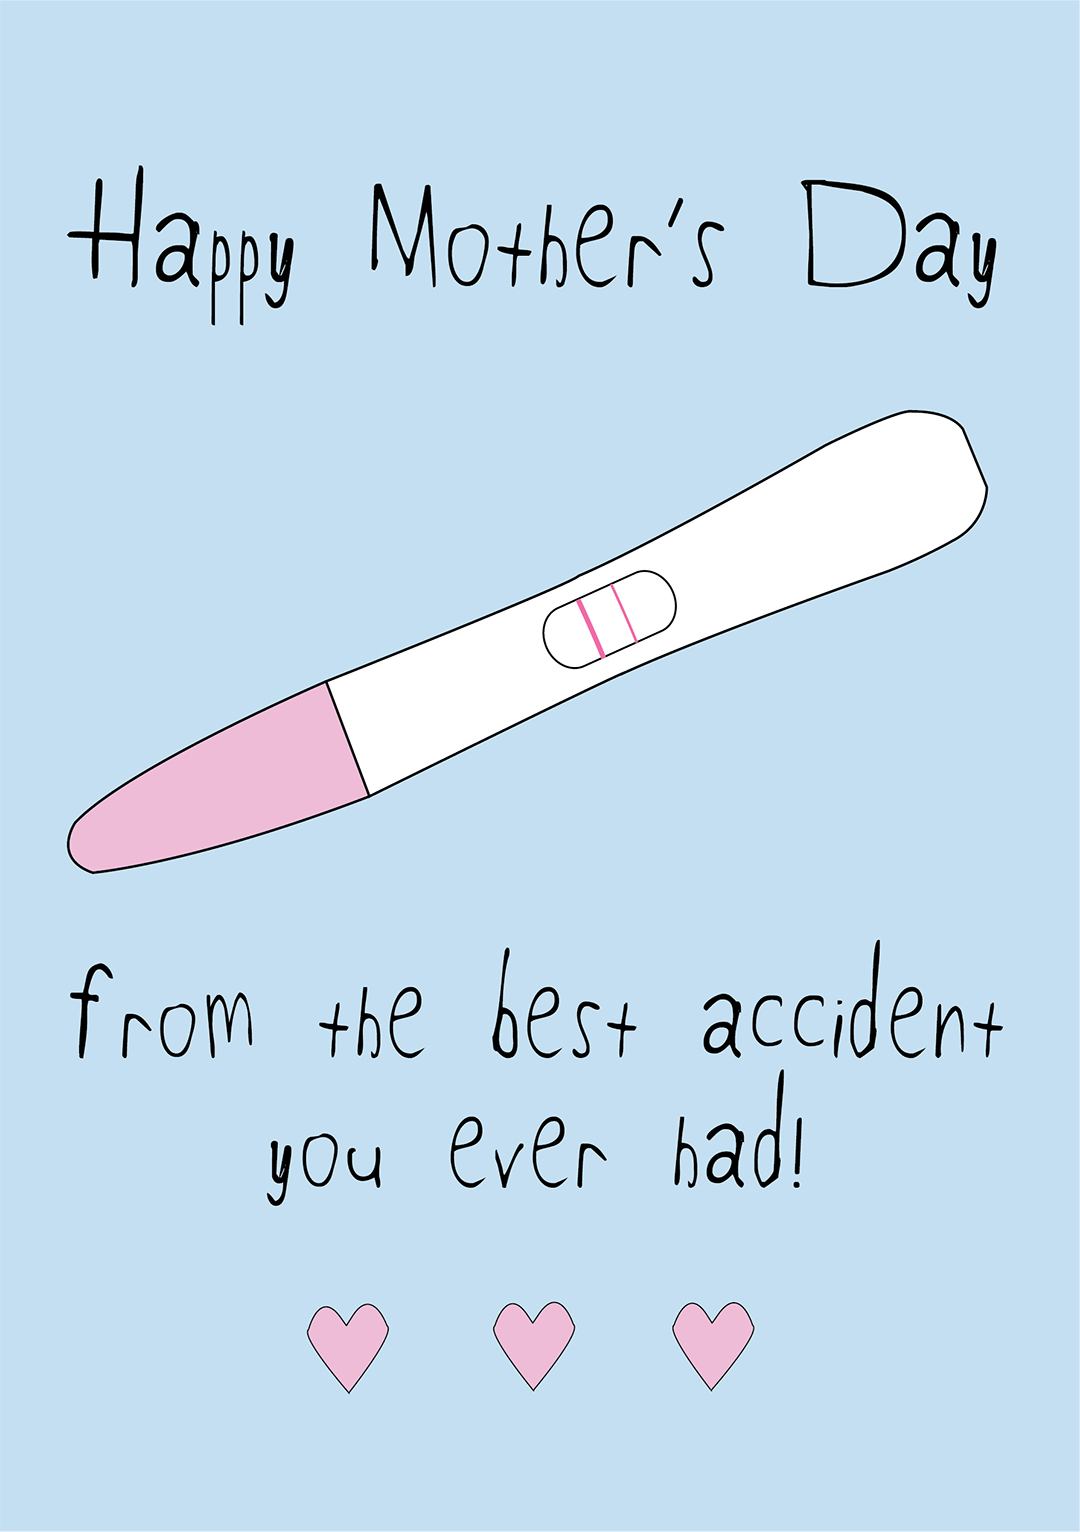 From The Best Accident You Ever Had - Mother's Day Card